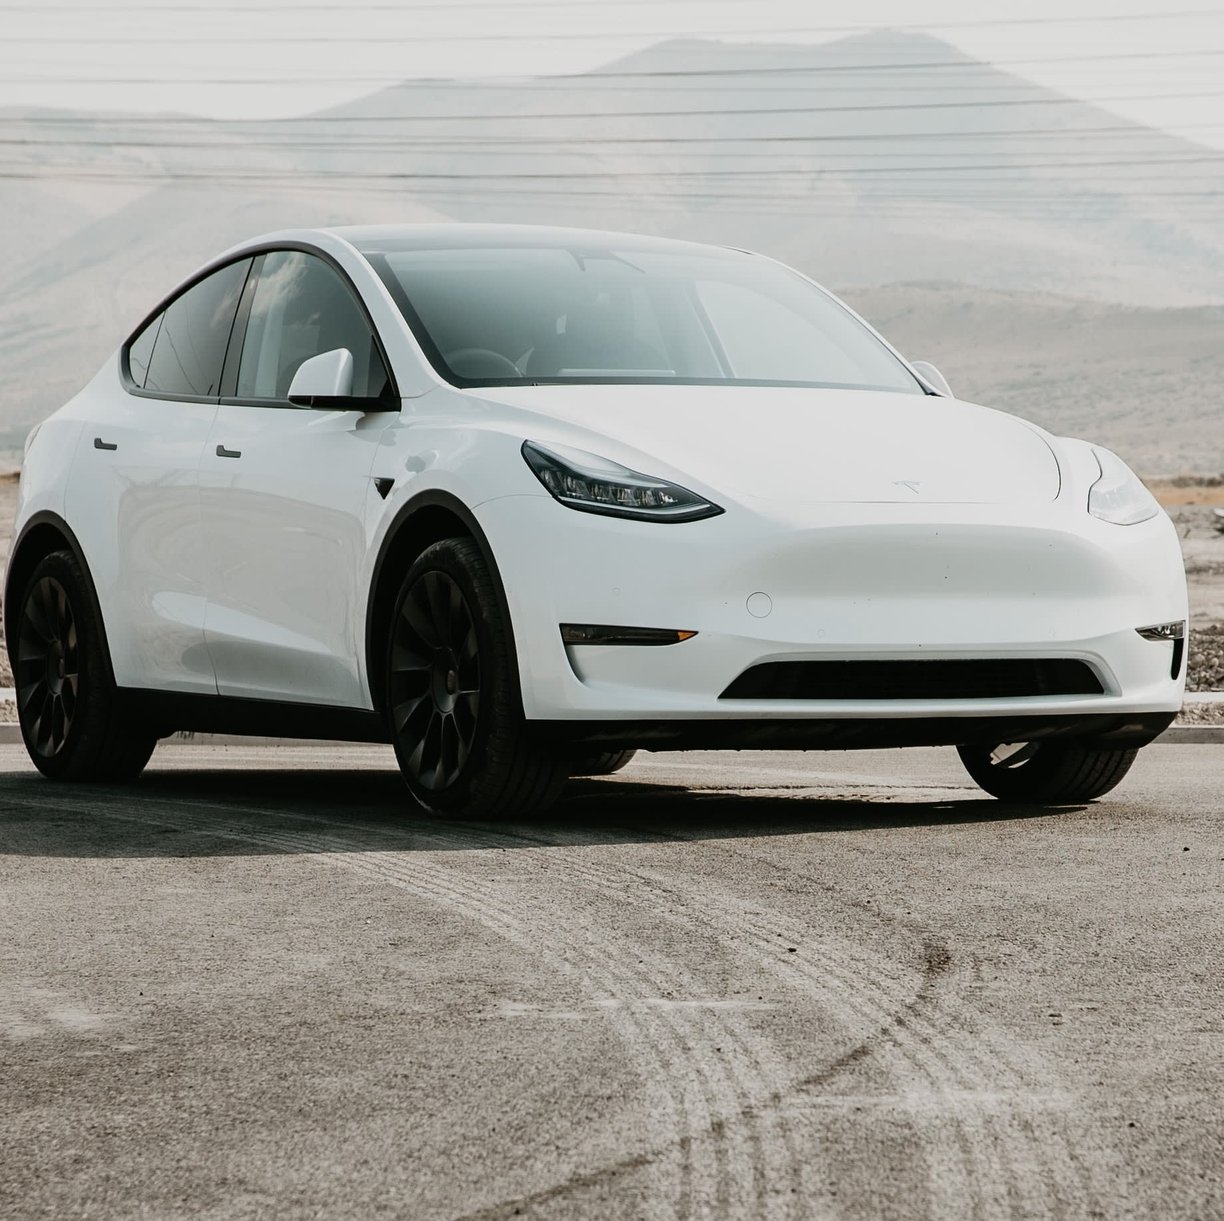 The Tesla Model Y in the car subscription from Clyde